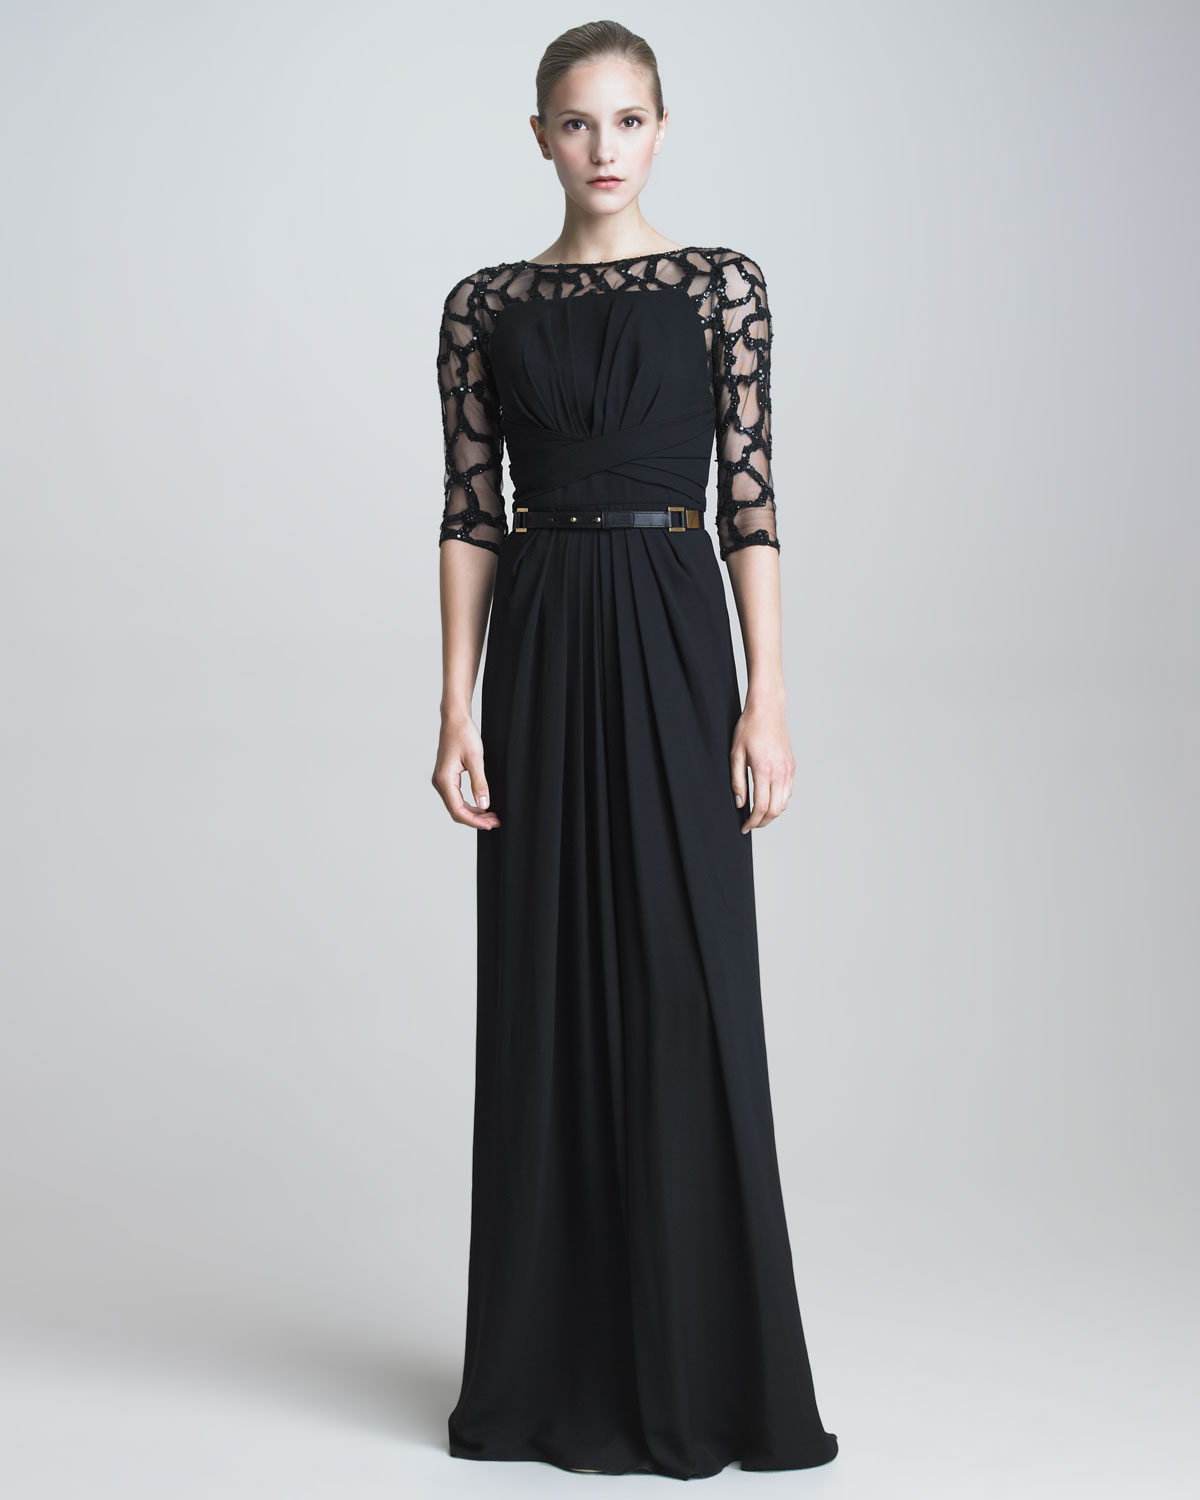 Lyst - Elie Saab Gown with Beaded Illusion Lace in Black